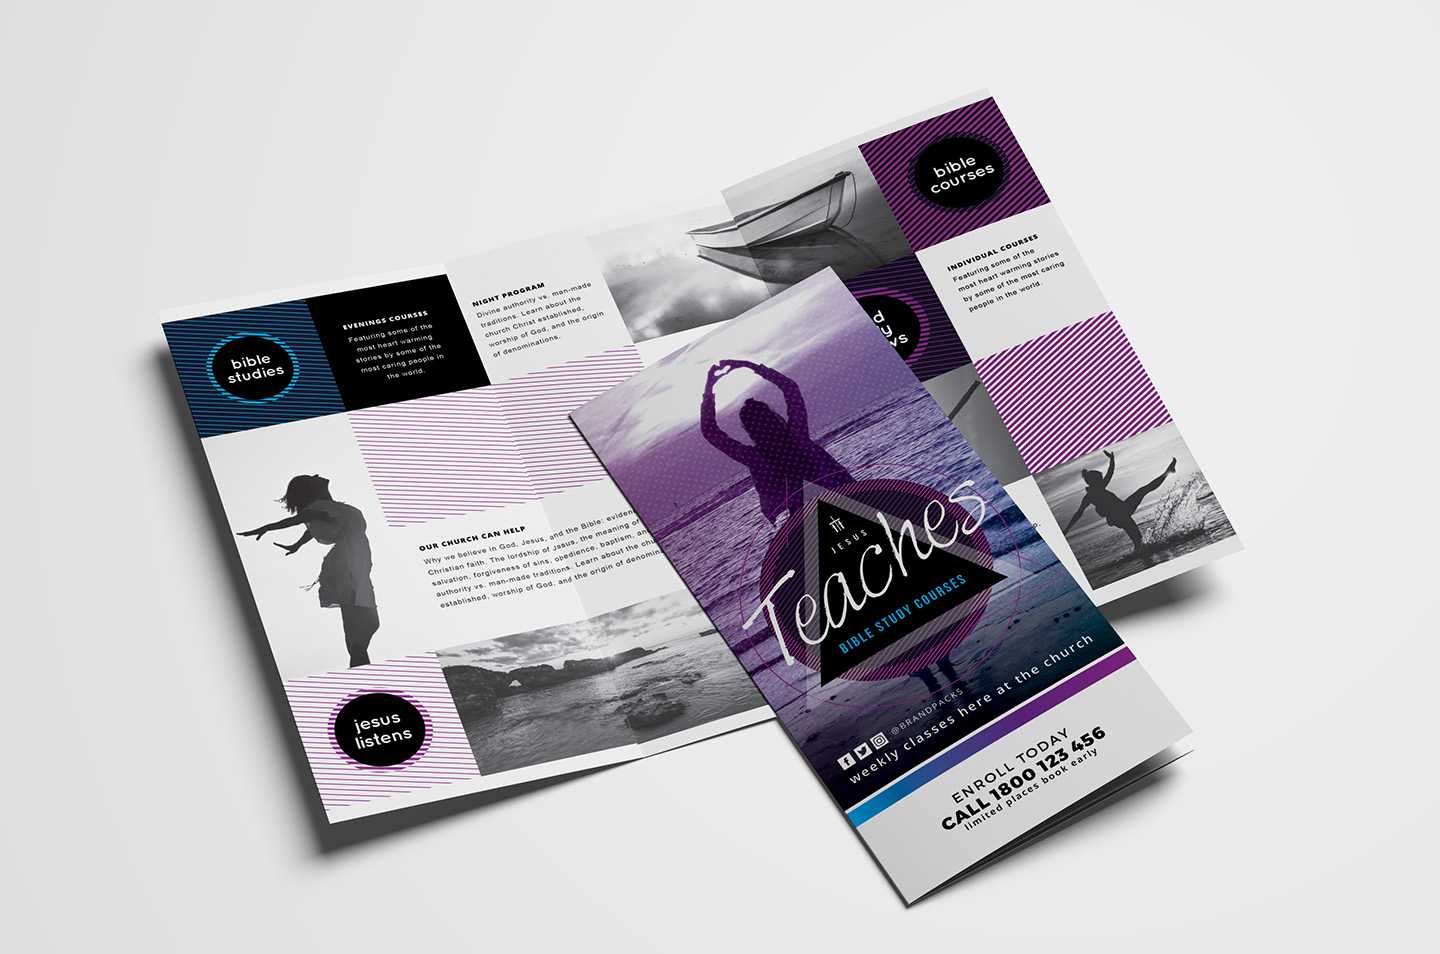 Free Church Templates – Photoshop Psd & Illustrator Ai Regarding Illustrator Brochure Templates Free Download